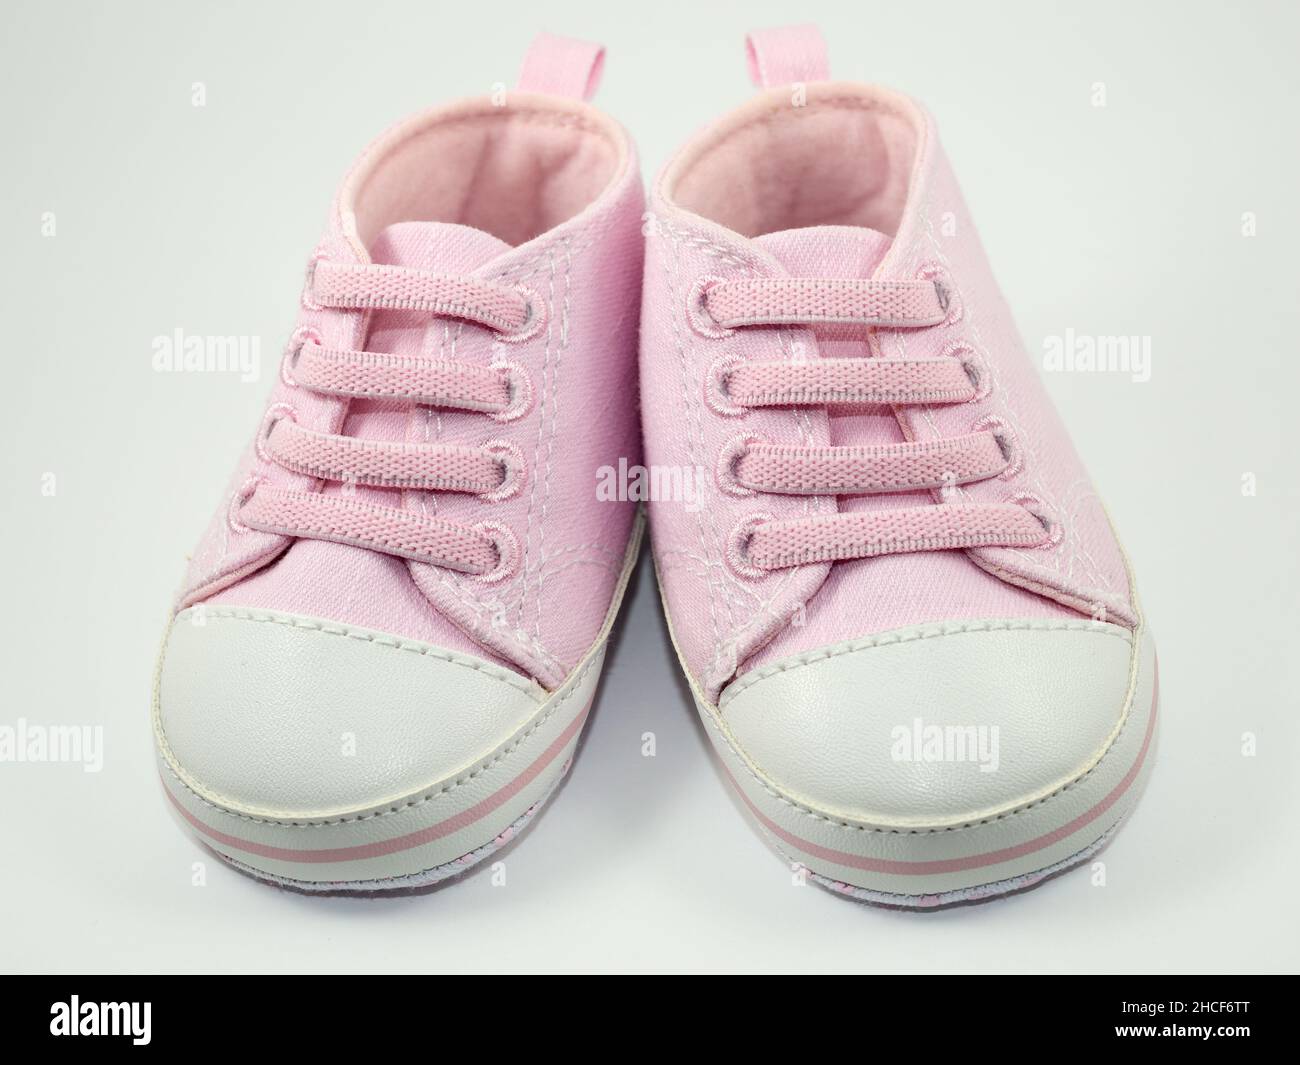 a pair of pink sneakers of small size on a white background Stock Photo -  Alamy